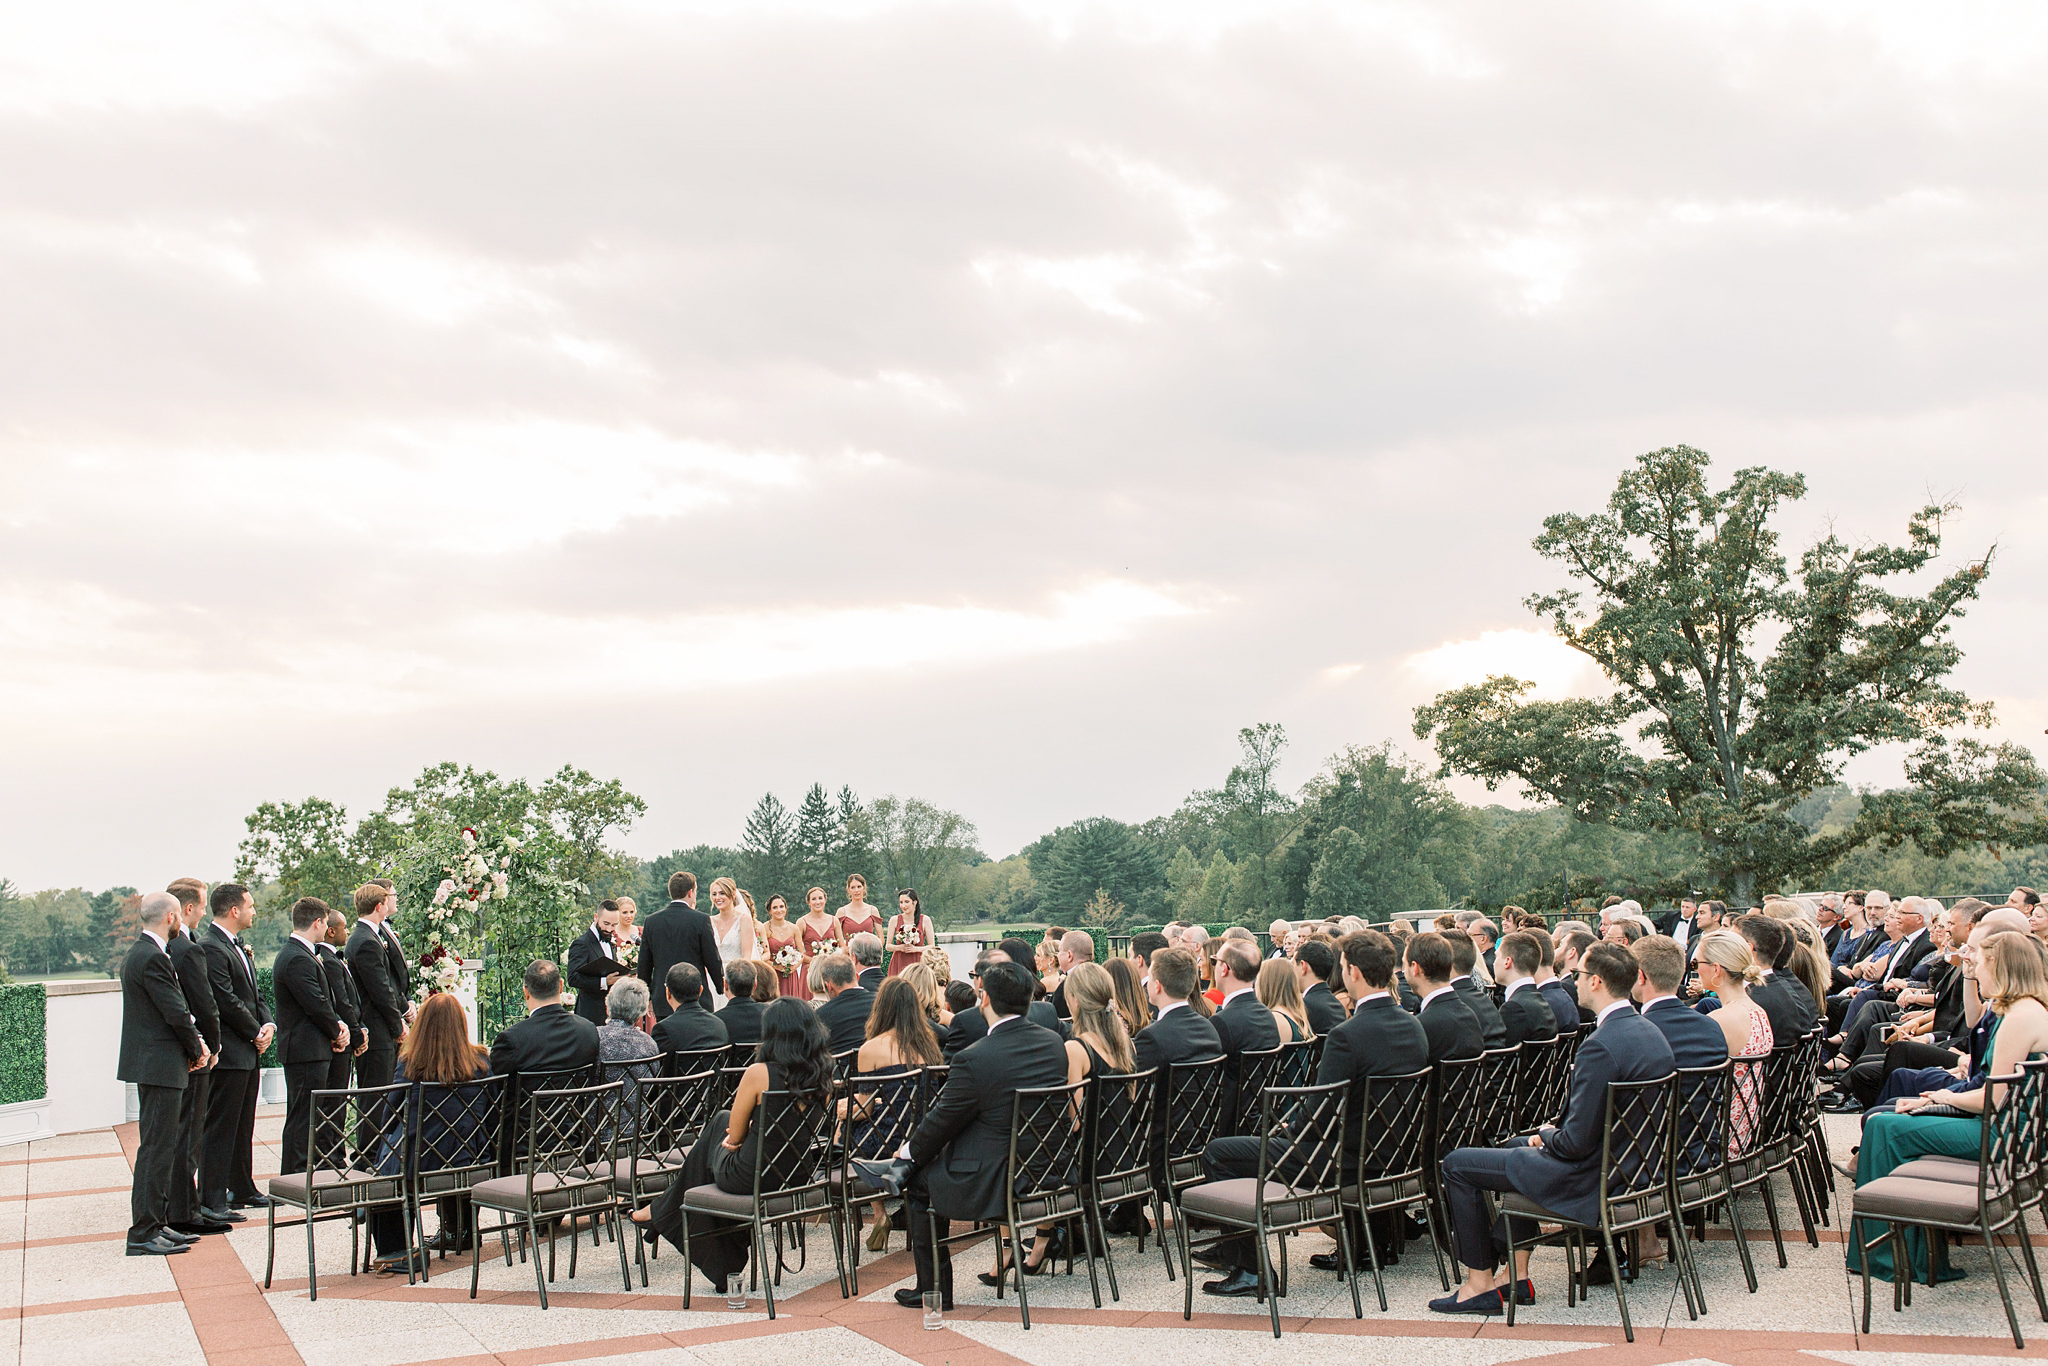 An elegant black tie wedding photographed by Alicia Lacey at the iconic Congressional Country Club in Bethesda, MD outside of Washington, DC.